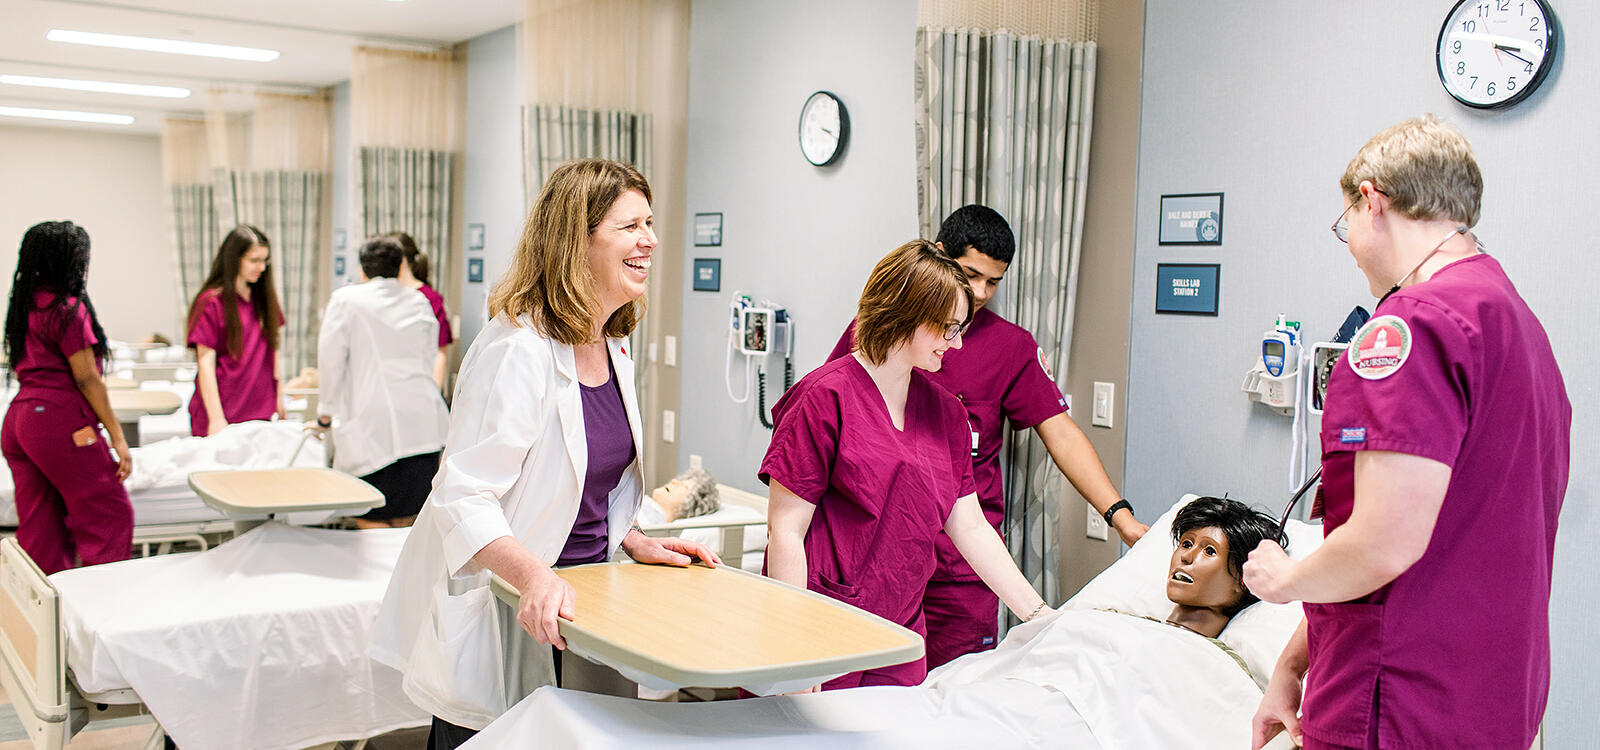 Three nursing students dressed in maroon scrubs look down at their patient and their professor watches over and smiles